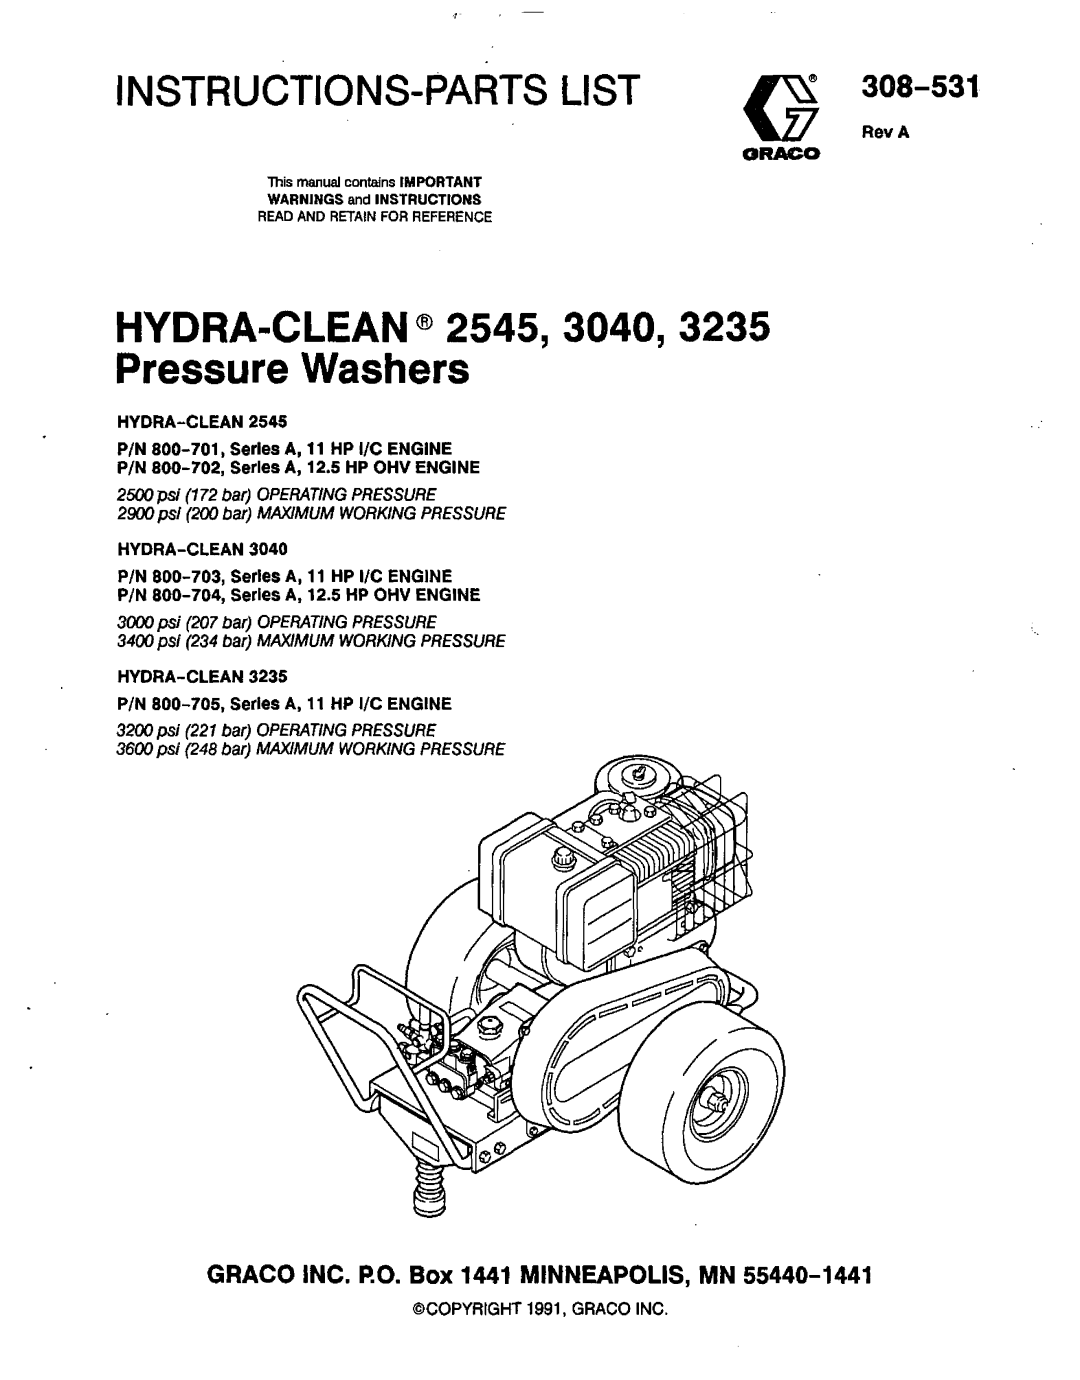 Graco Inc 800-701, 800-703, 800-702, 800-704 manual HYDRA-CLEAN@ 2545,3040,3235, Pressure Washers, Instructions-Parts List 